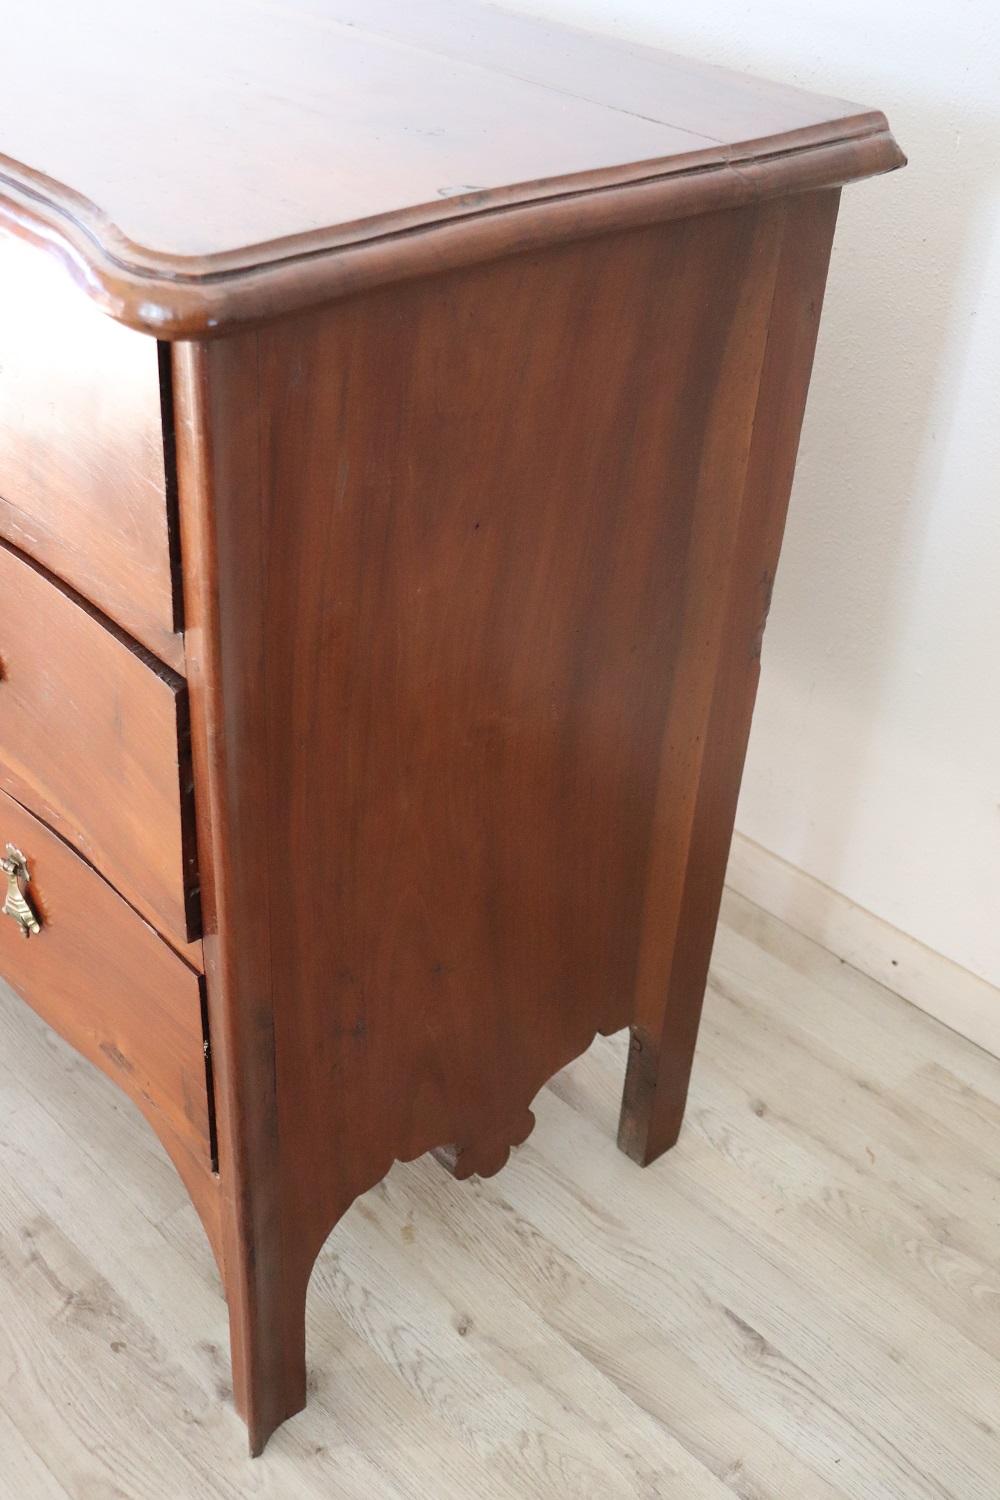 18th Century Italian Louis XV Walnut Antique Commode or Chest of Drawers For Sale 1